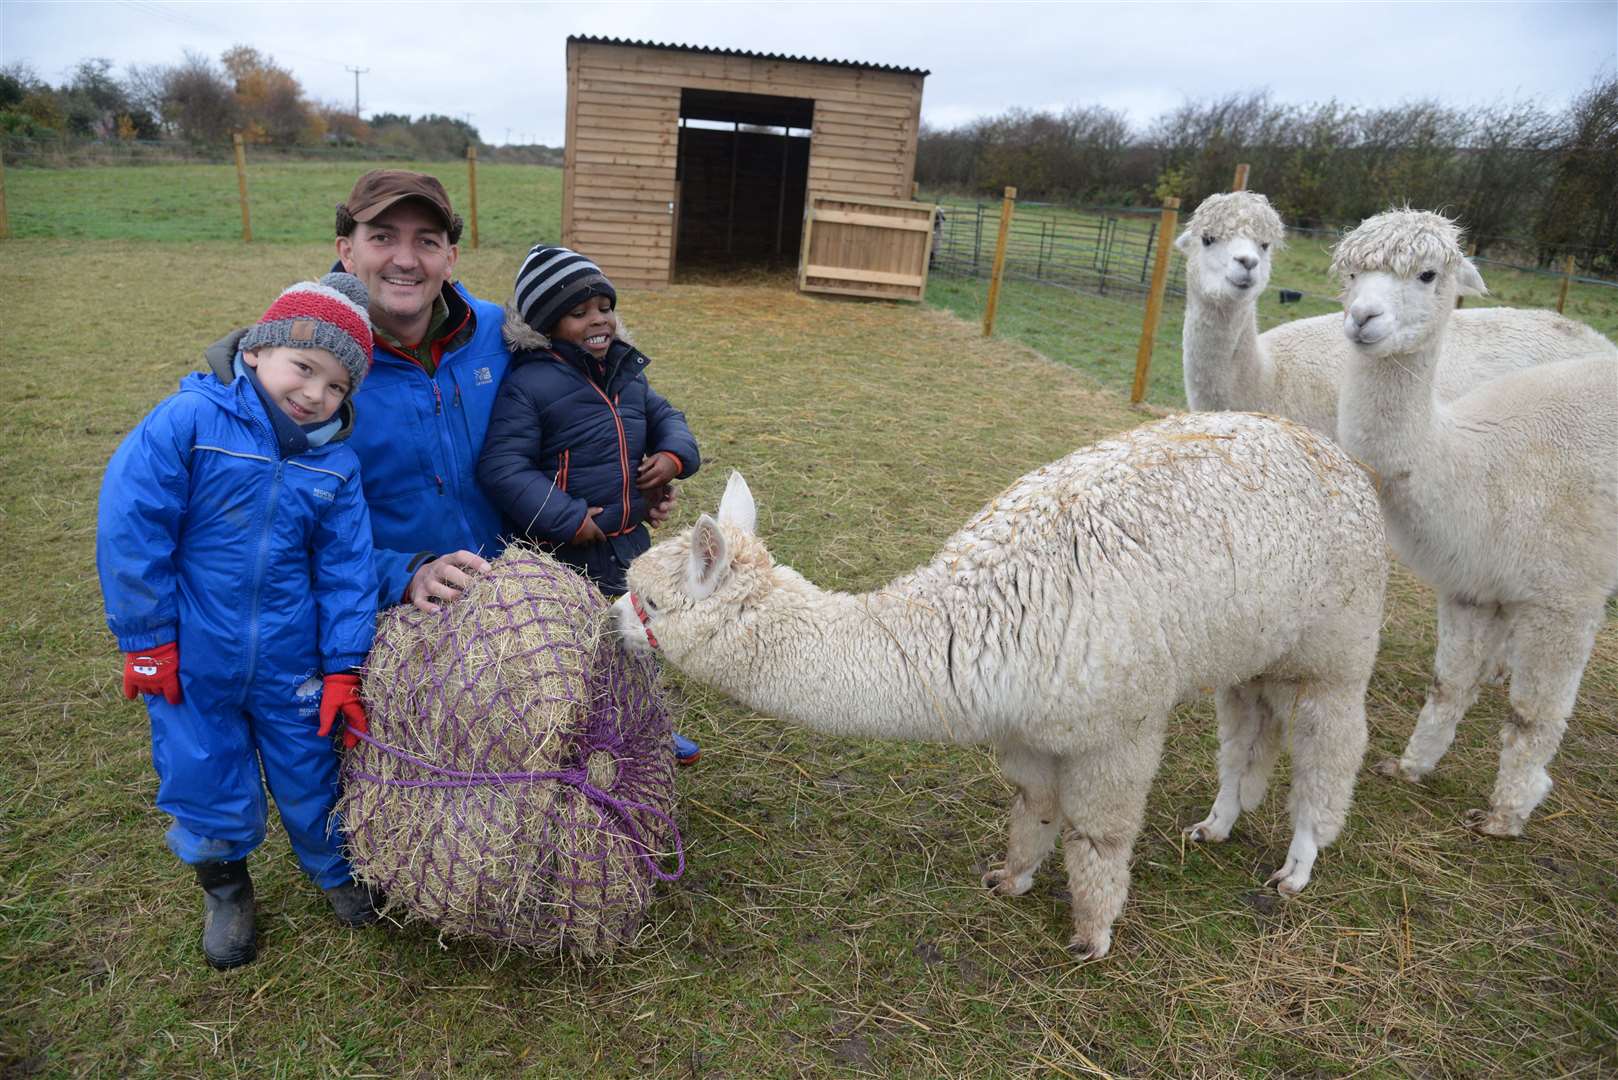 Kyle Ratcliffe feeding the alpacas at Curly's Farm, with Emilio and Gabriel, before lockdown